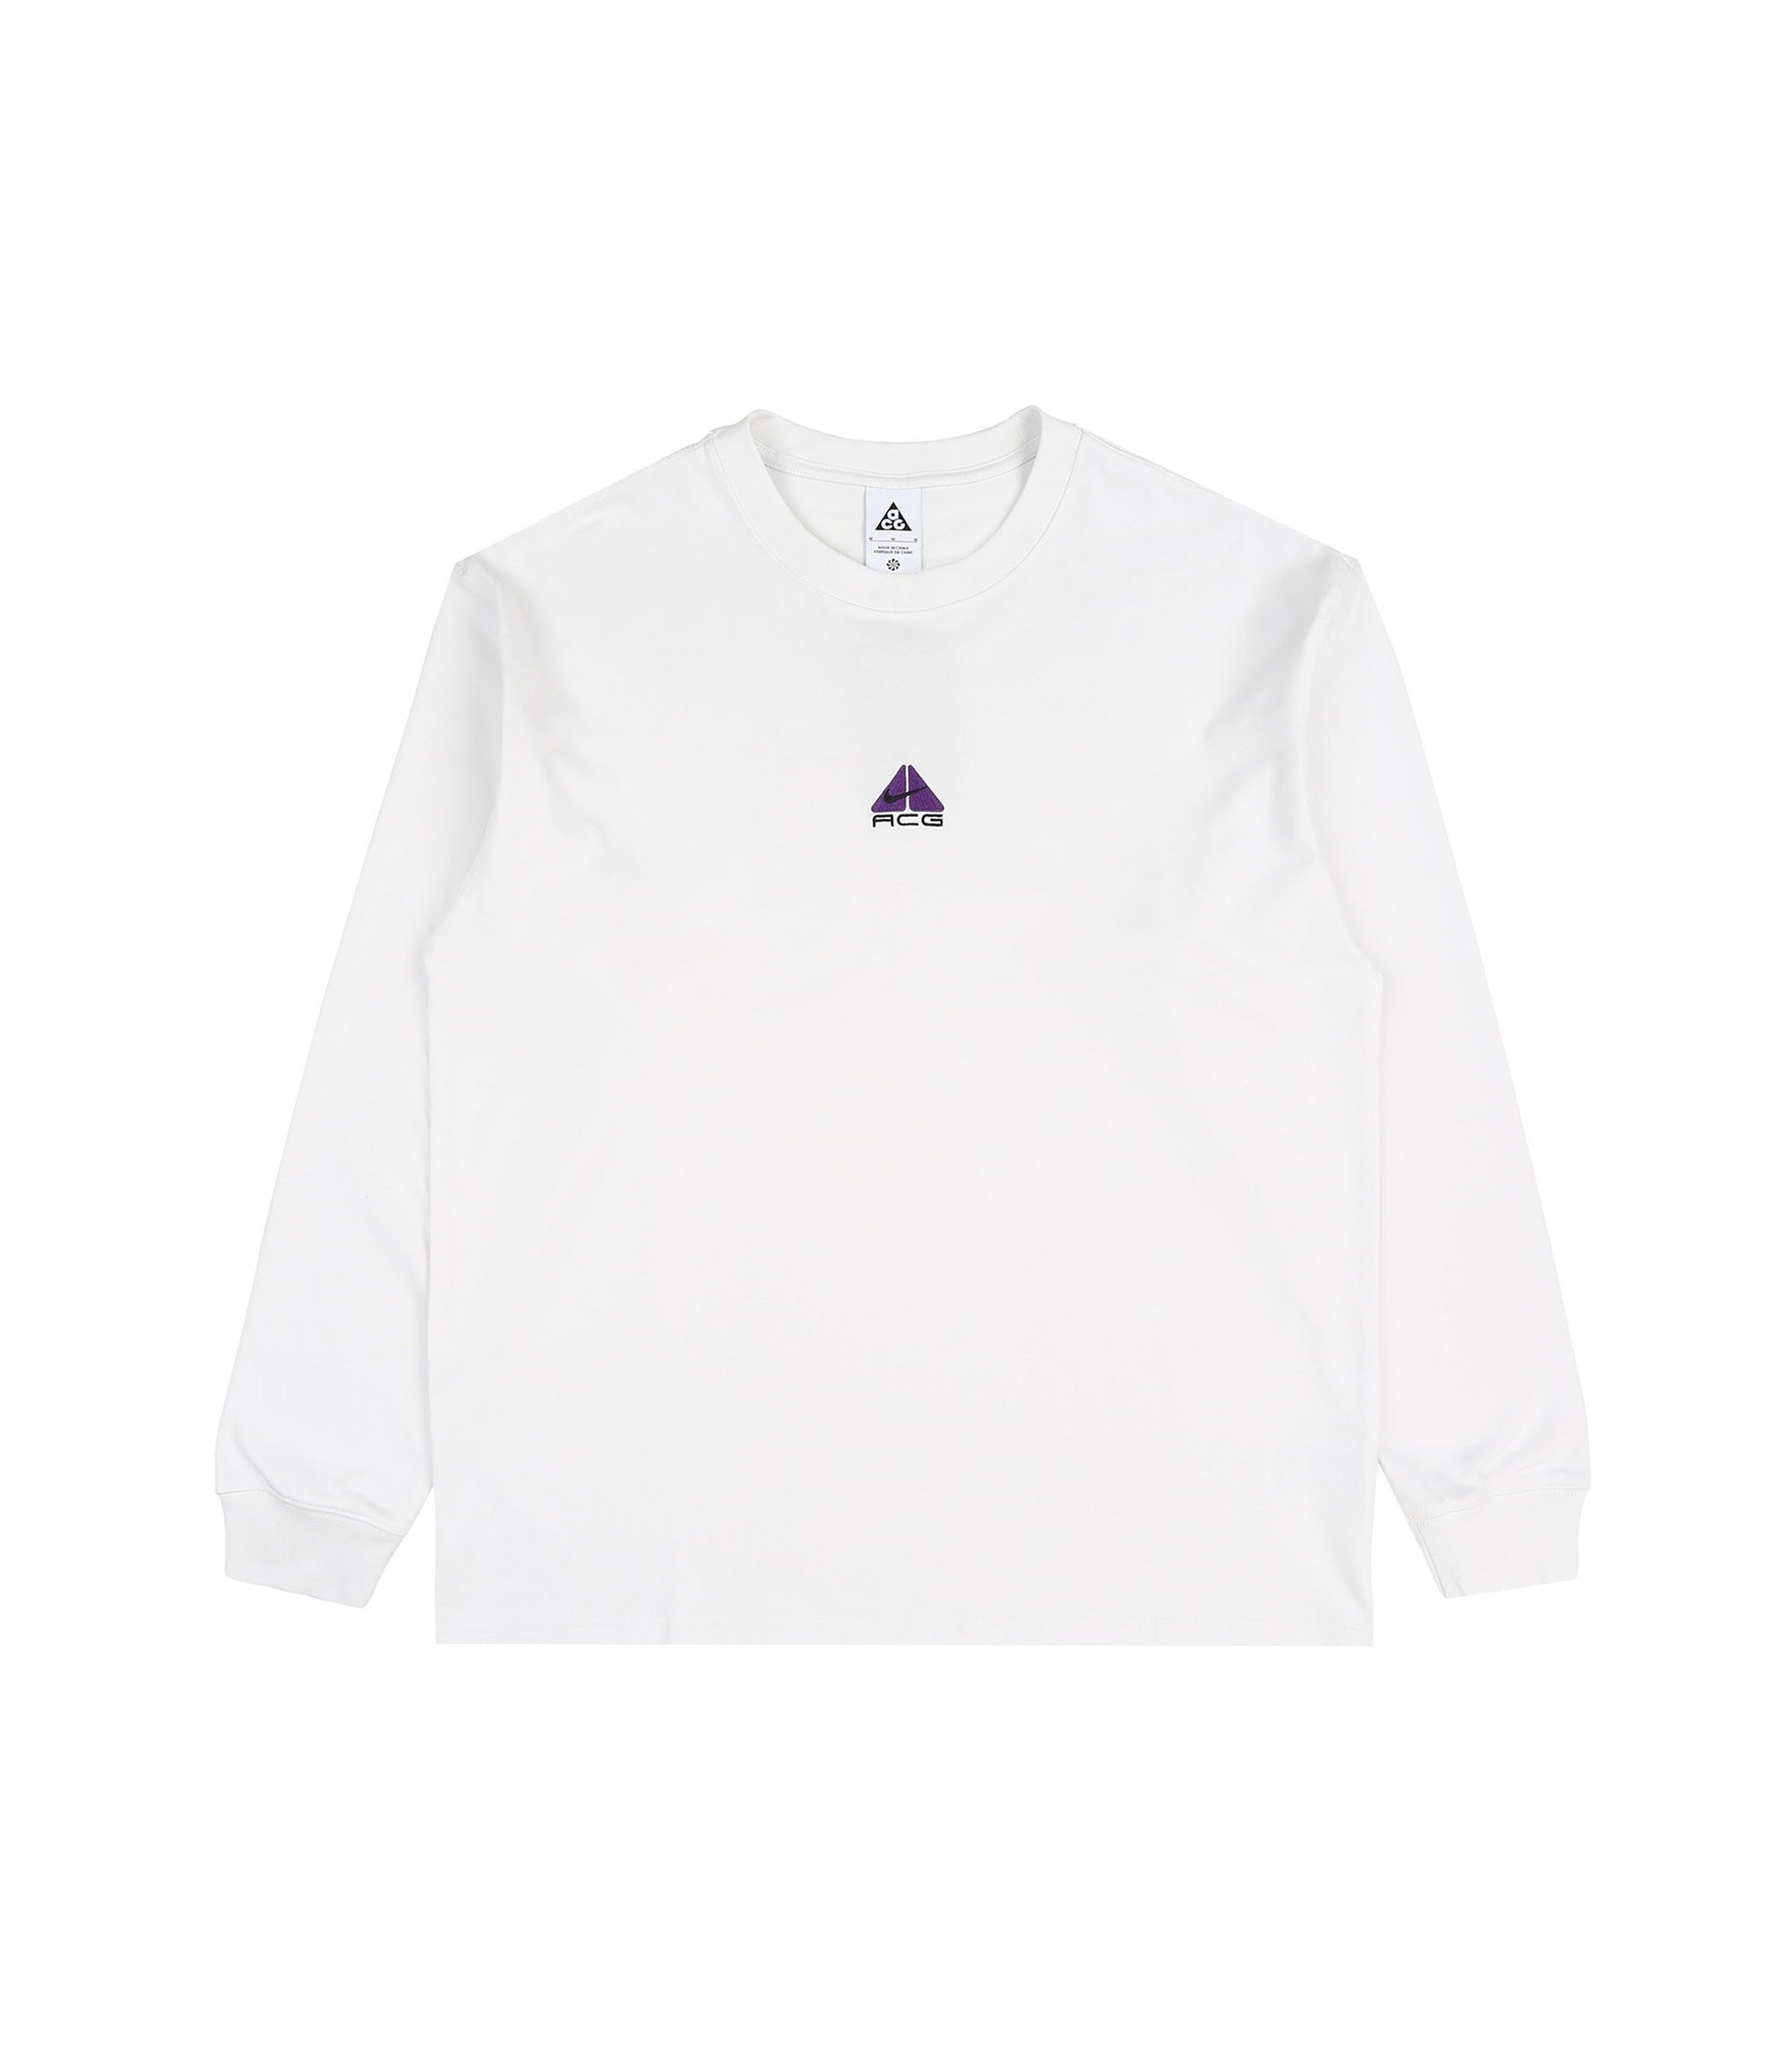 Lungs L/S T-shirt - Summit White / Purple Cosmos